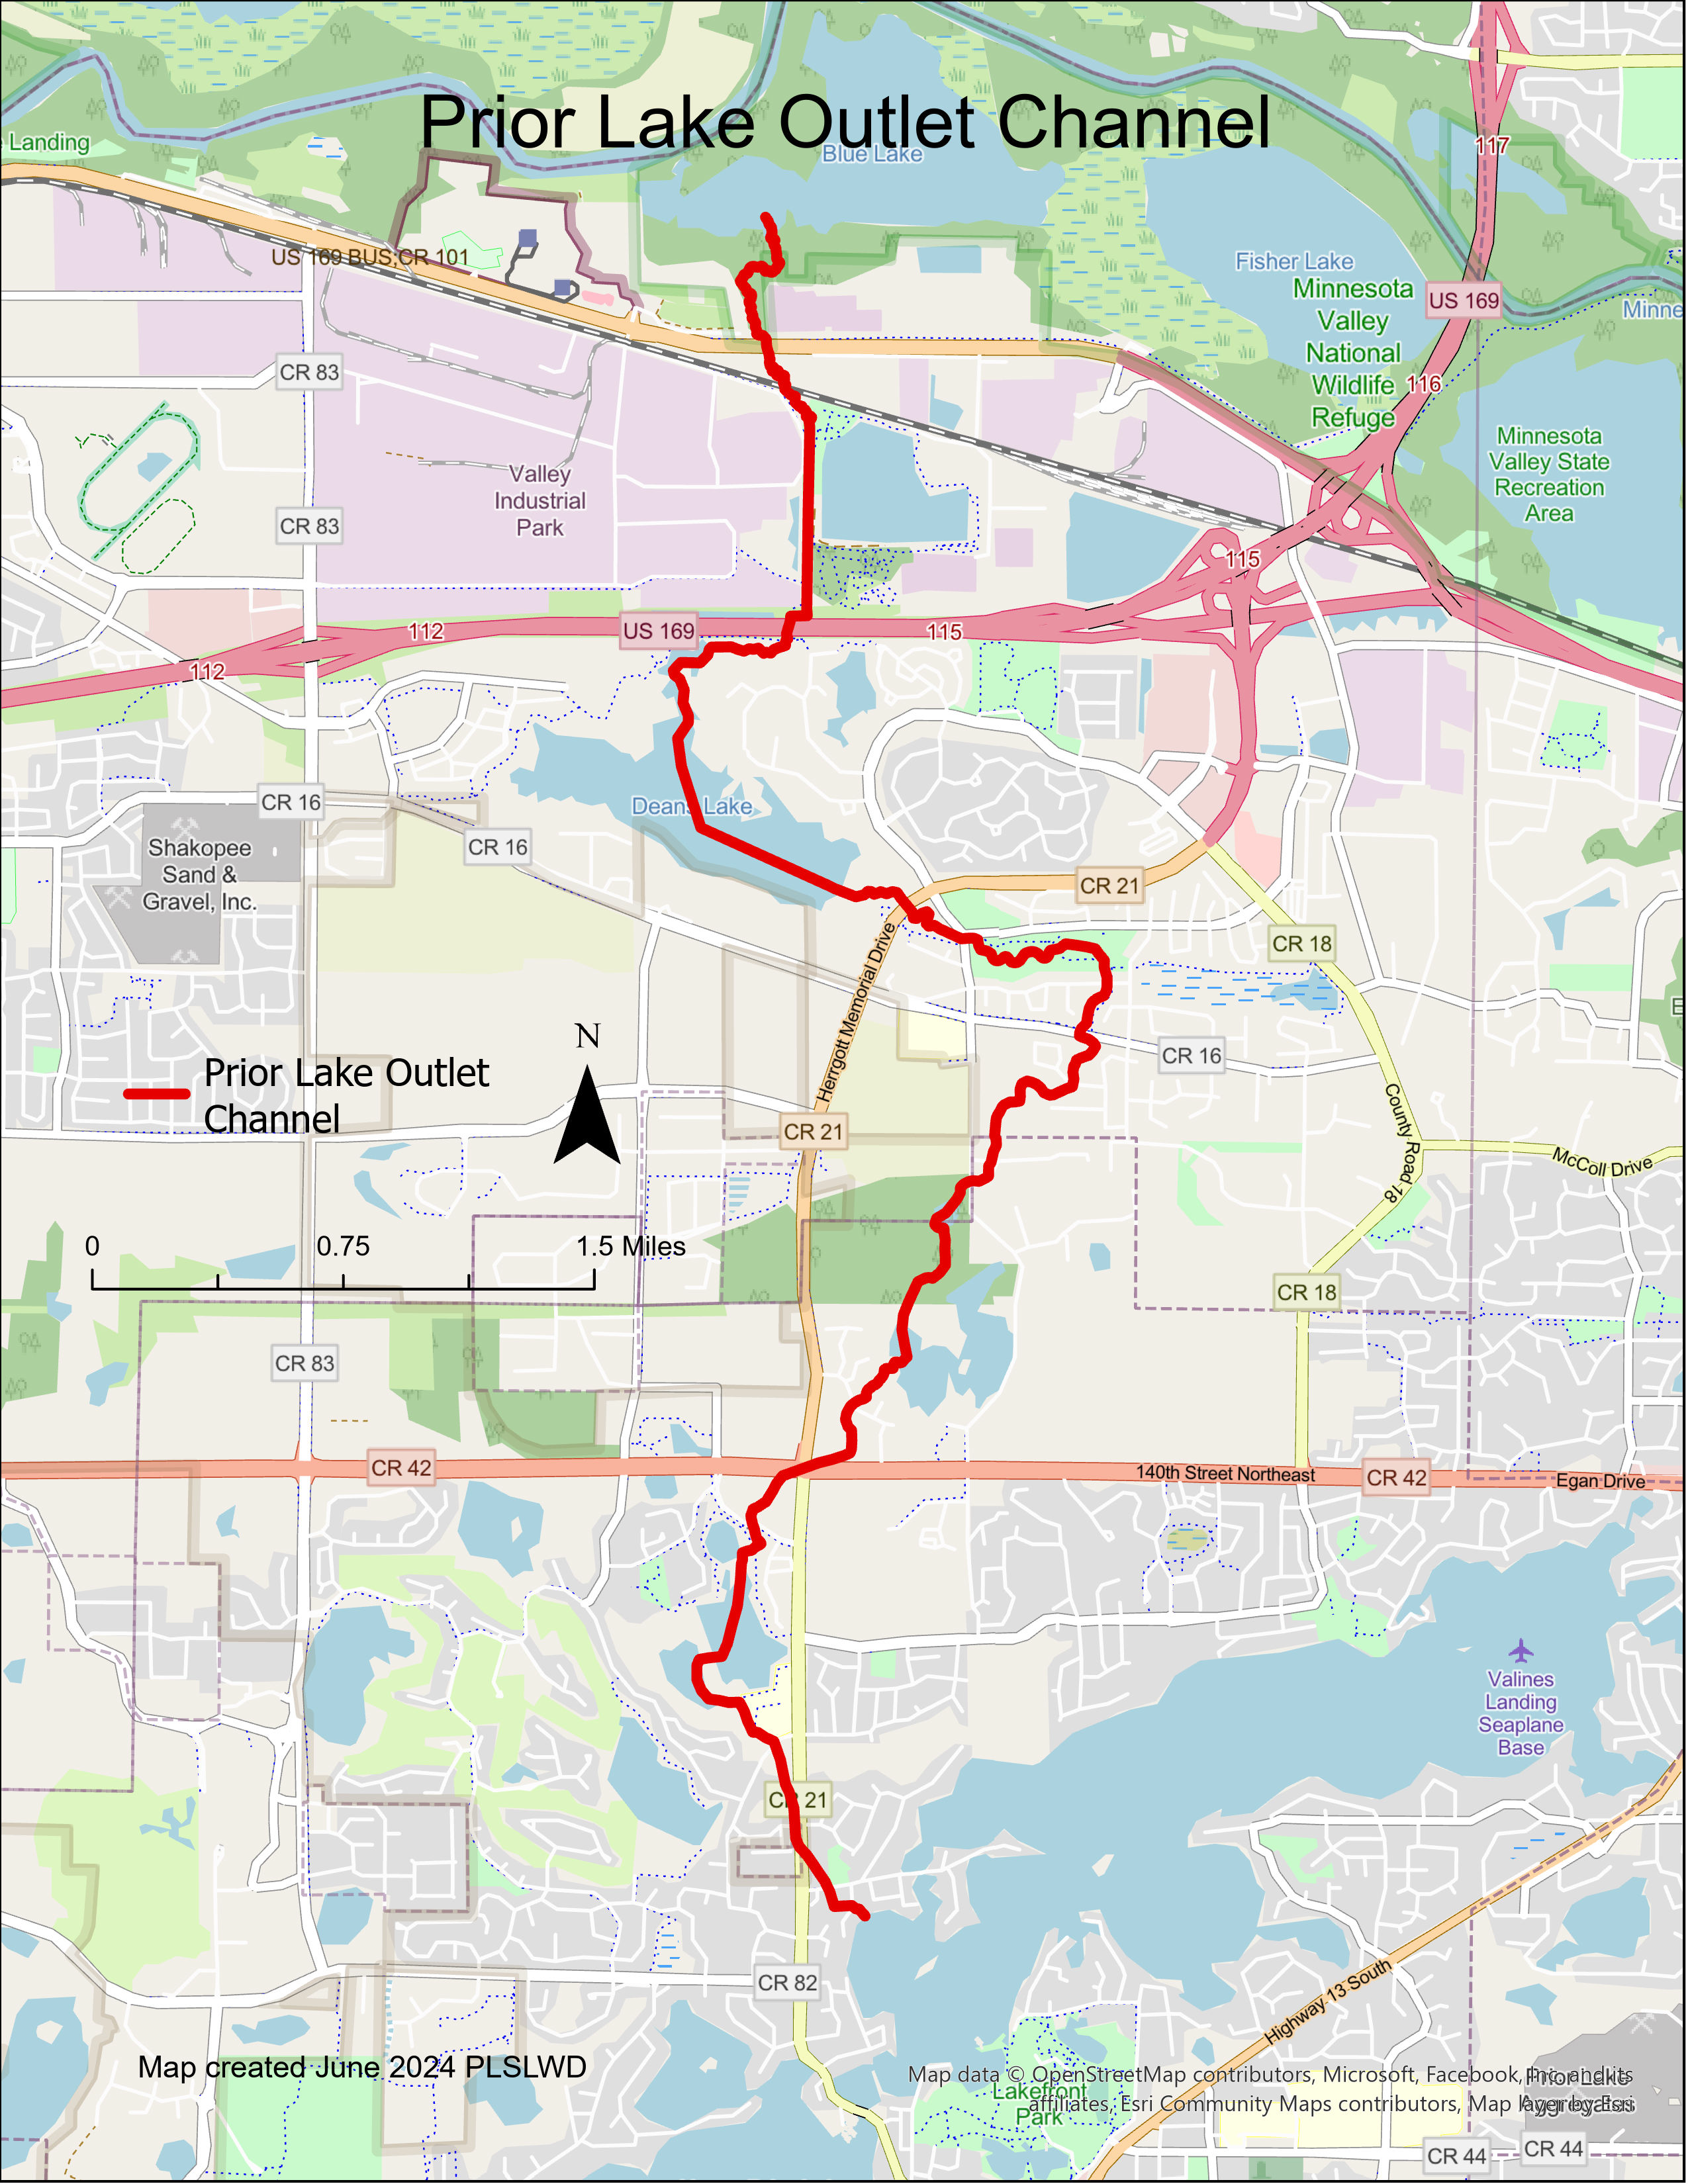 Prior Lake Outlet Channel map image